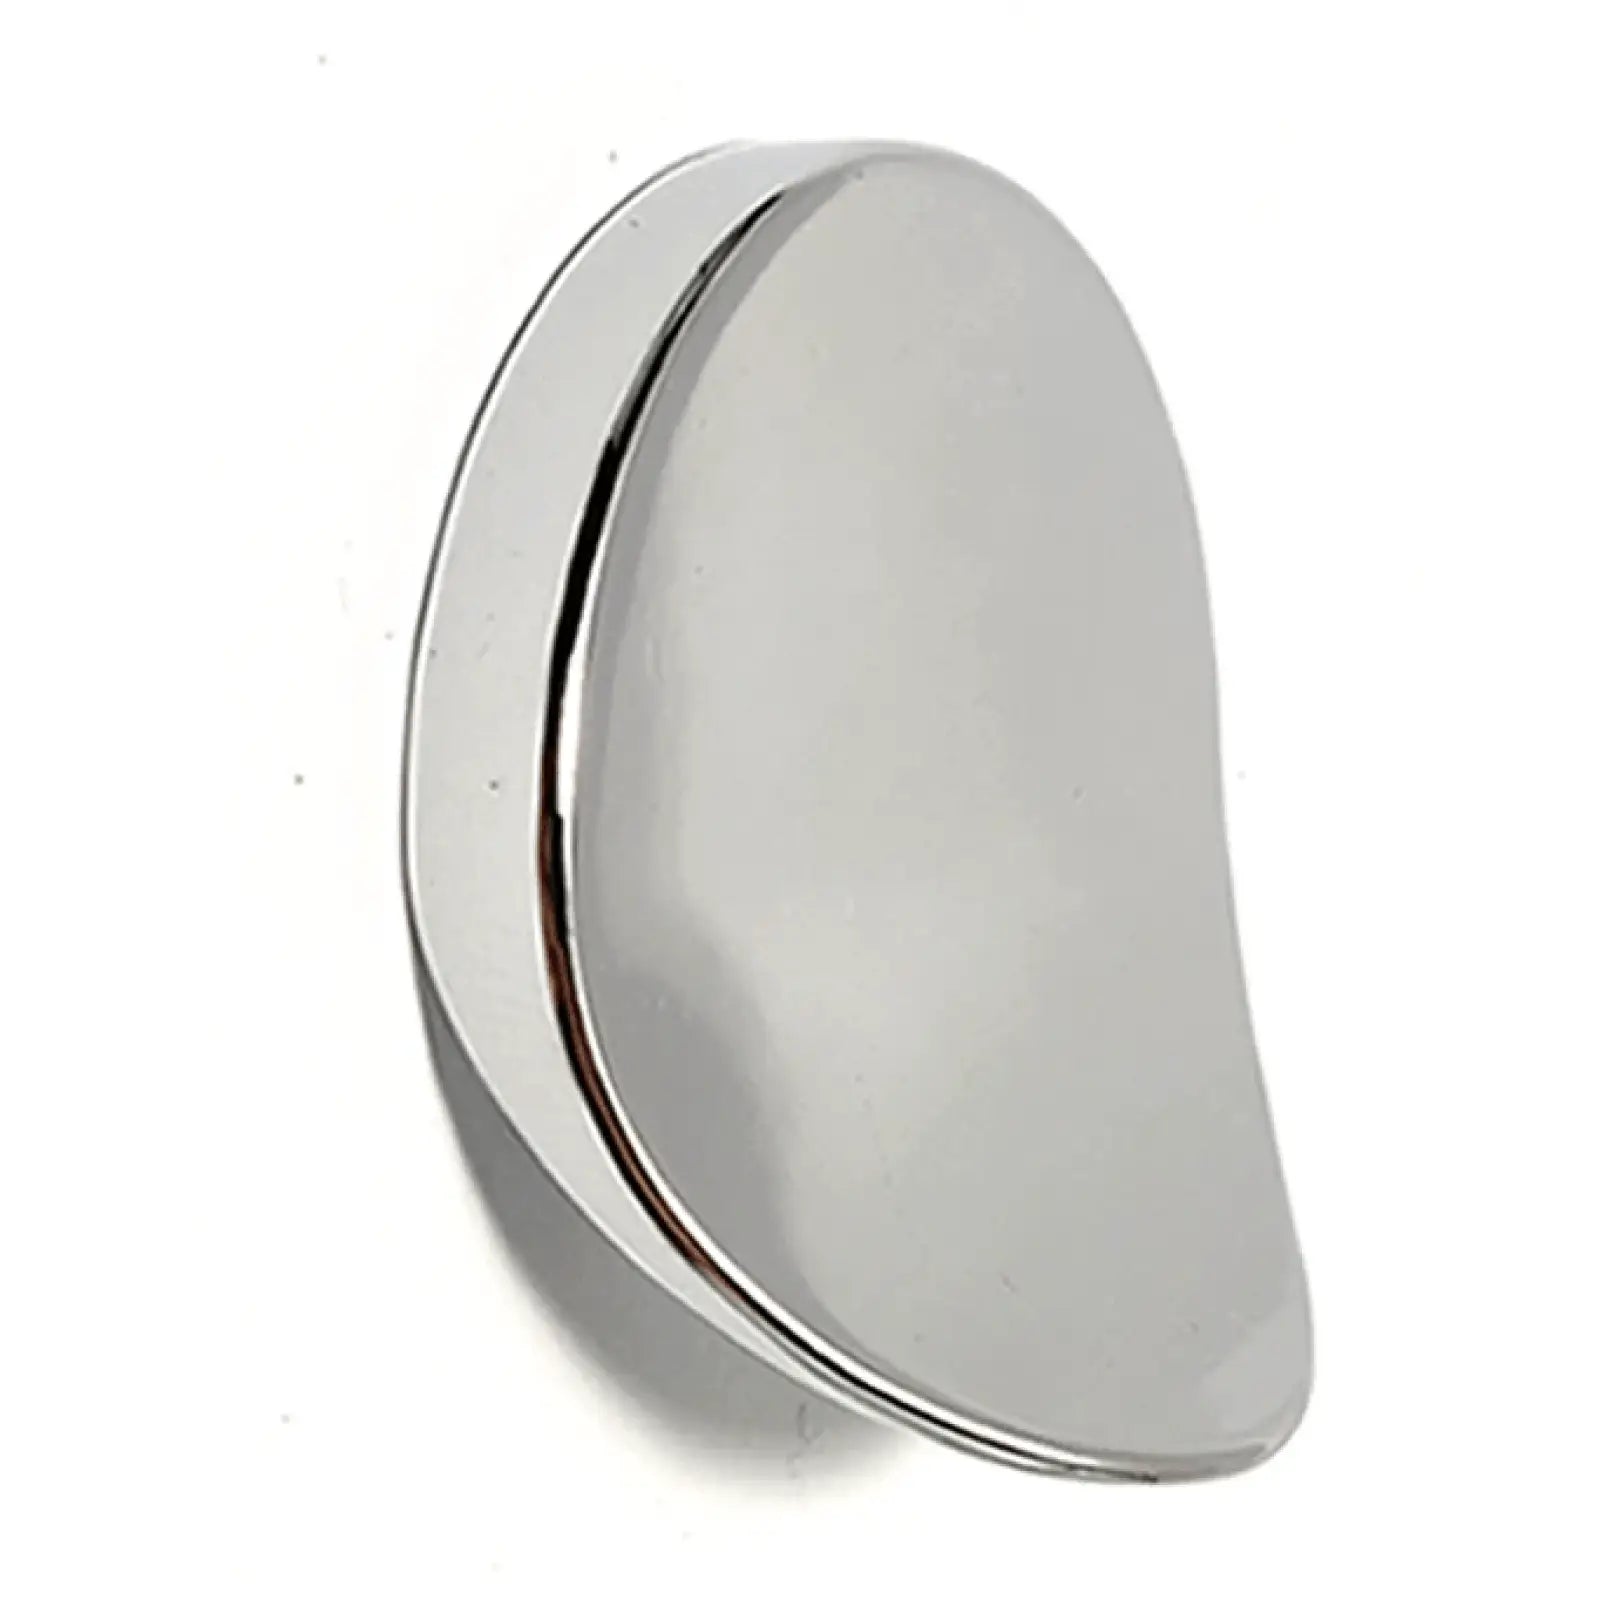 Rounded Knob Finger Pull Handle Knob 50mm - Decor And Decor